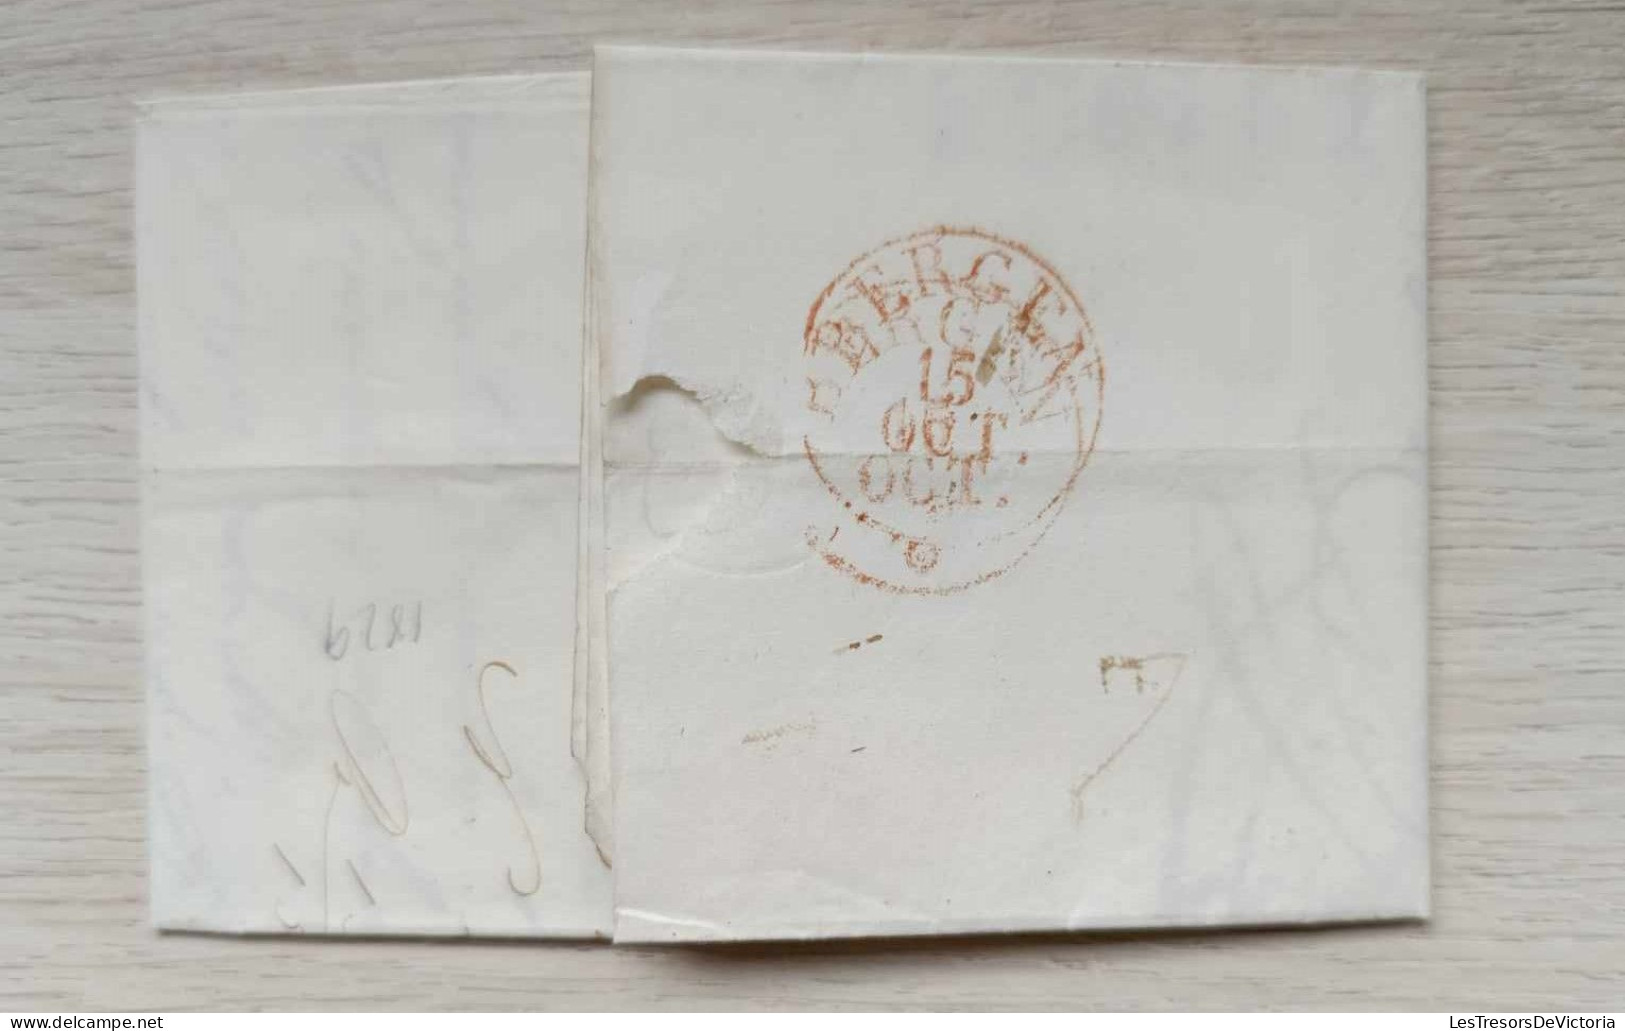 Letter Mailed On October 13th 1829 From Gent To Hornu  - Weight Indication "16" Wigtjes - 1815-1830 (Periodo Olandese)